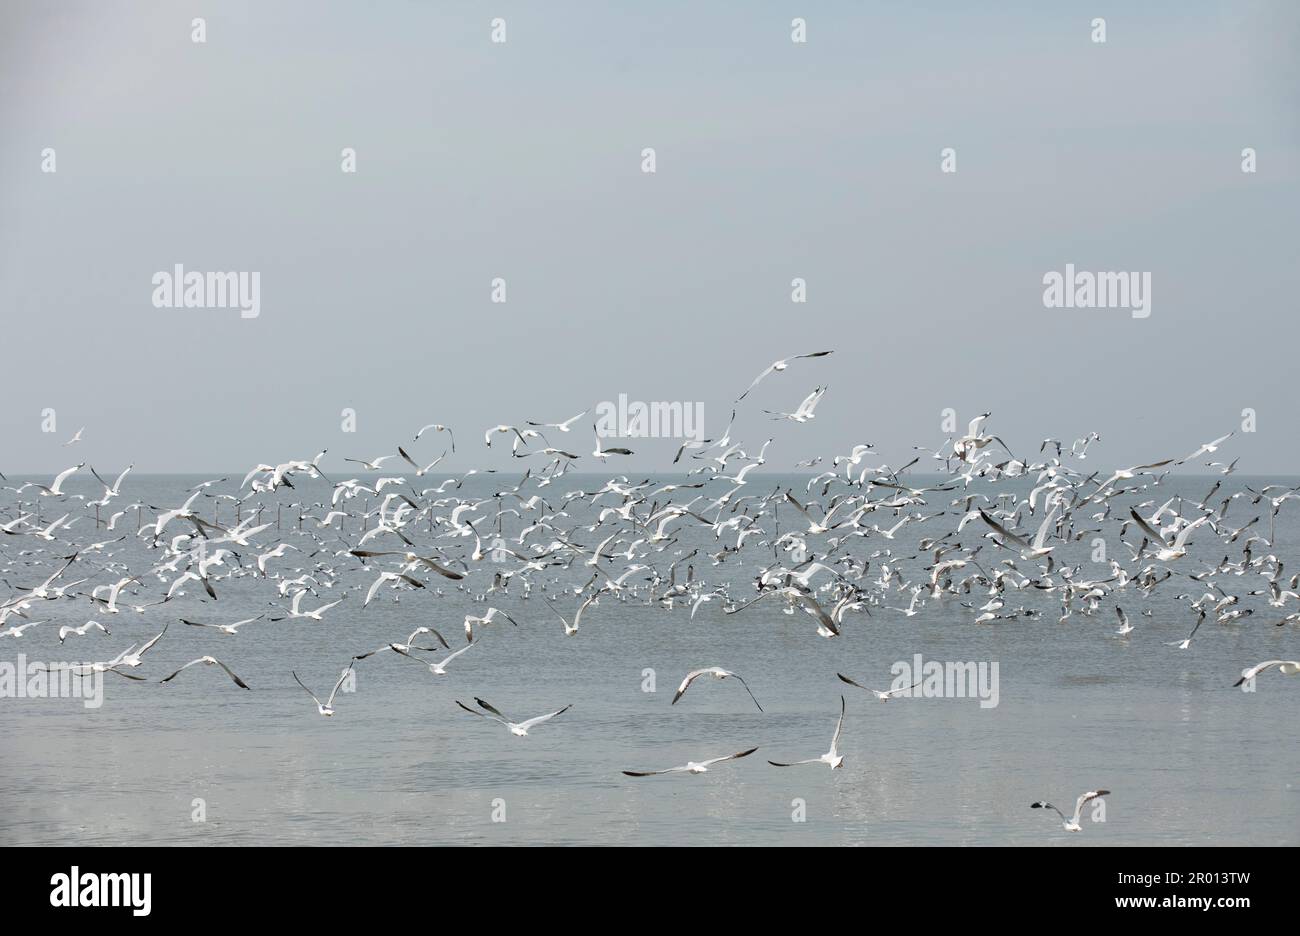 Flock of seagulls flying above the sea Stock Photo